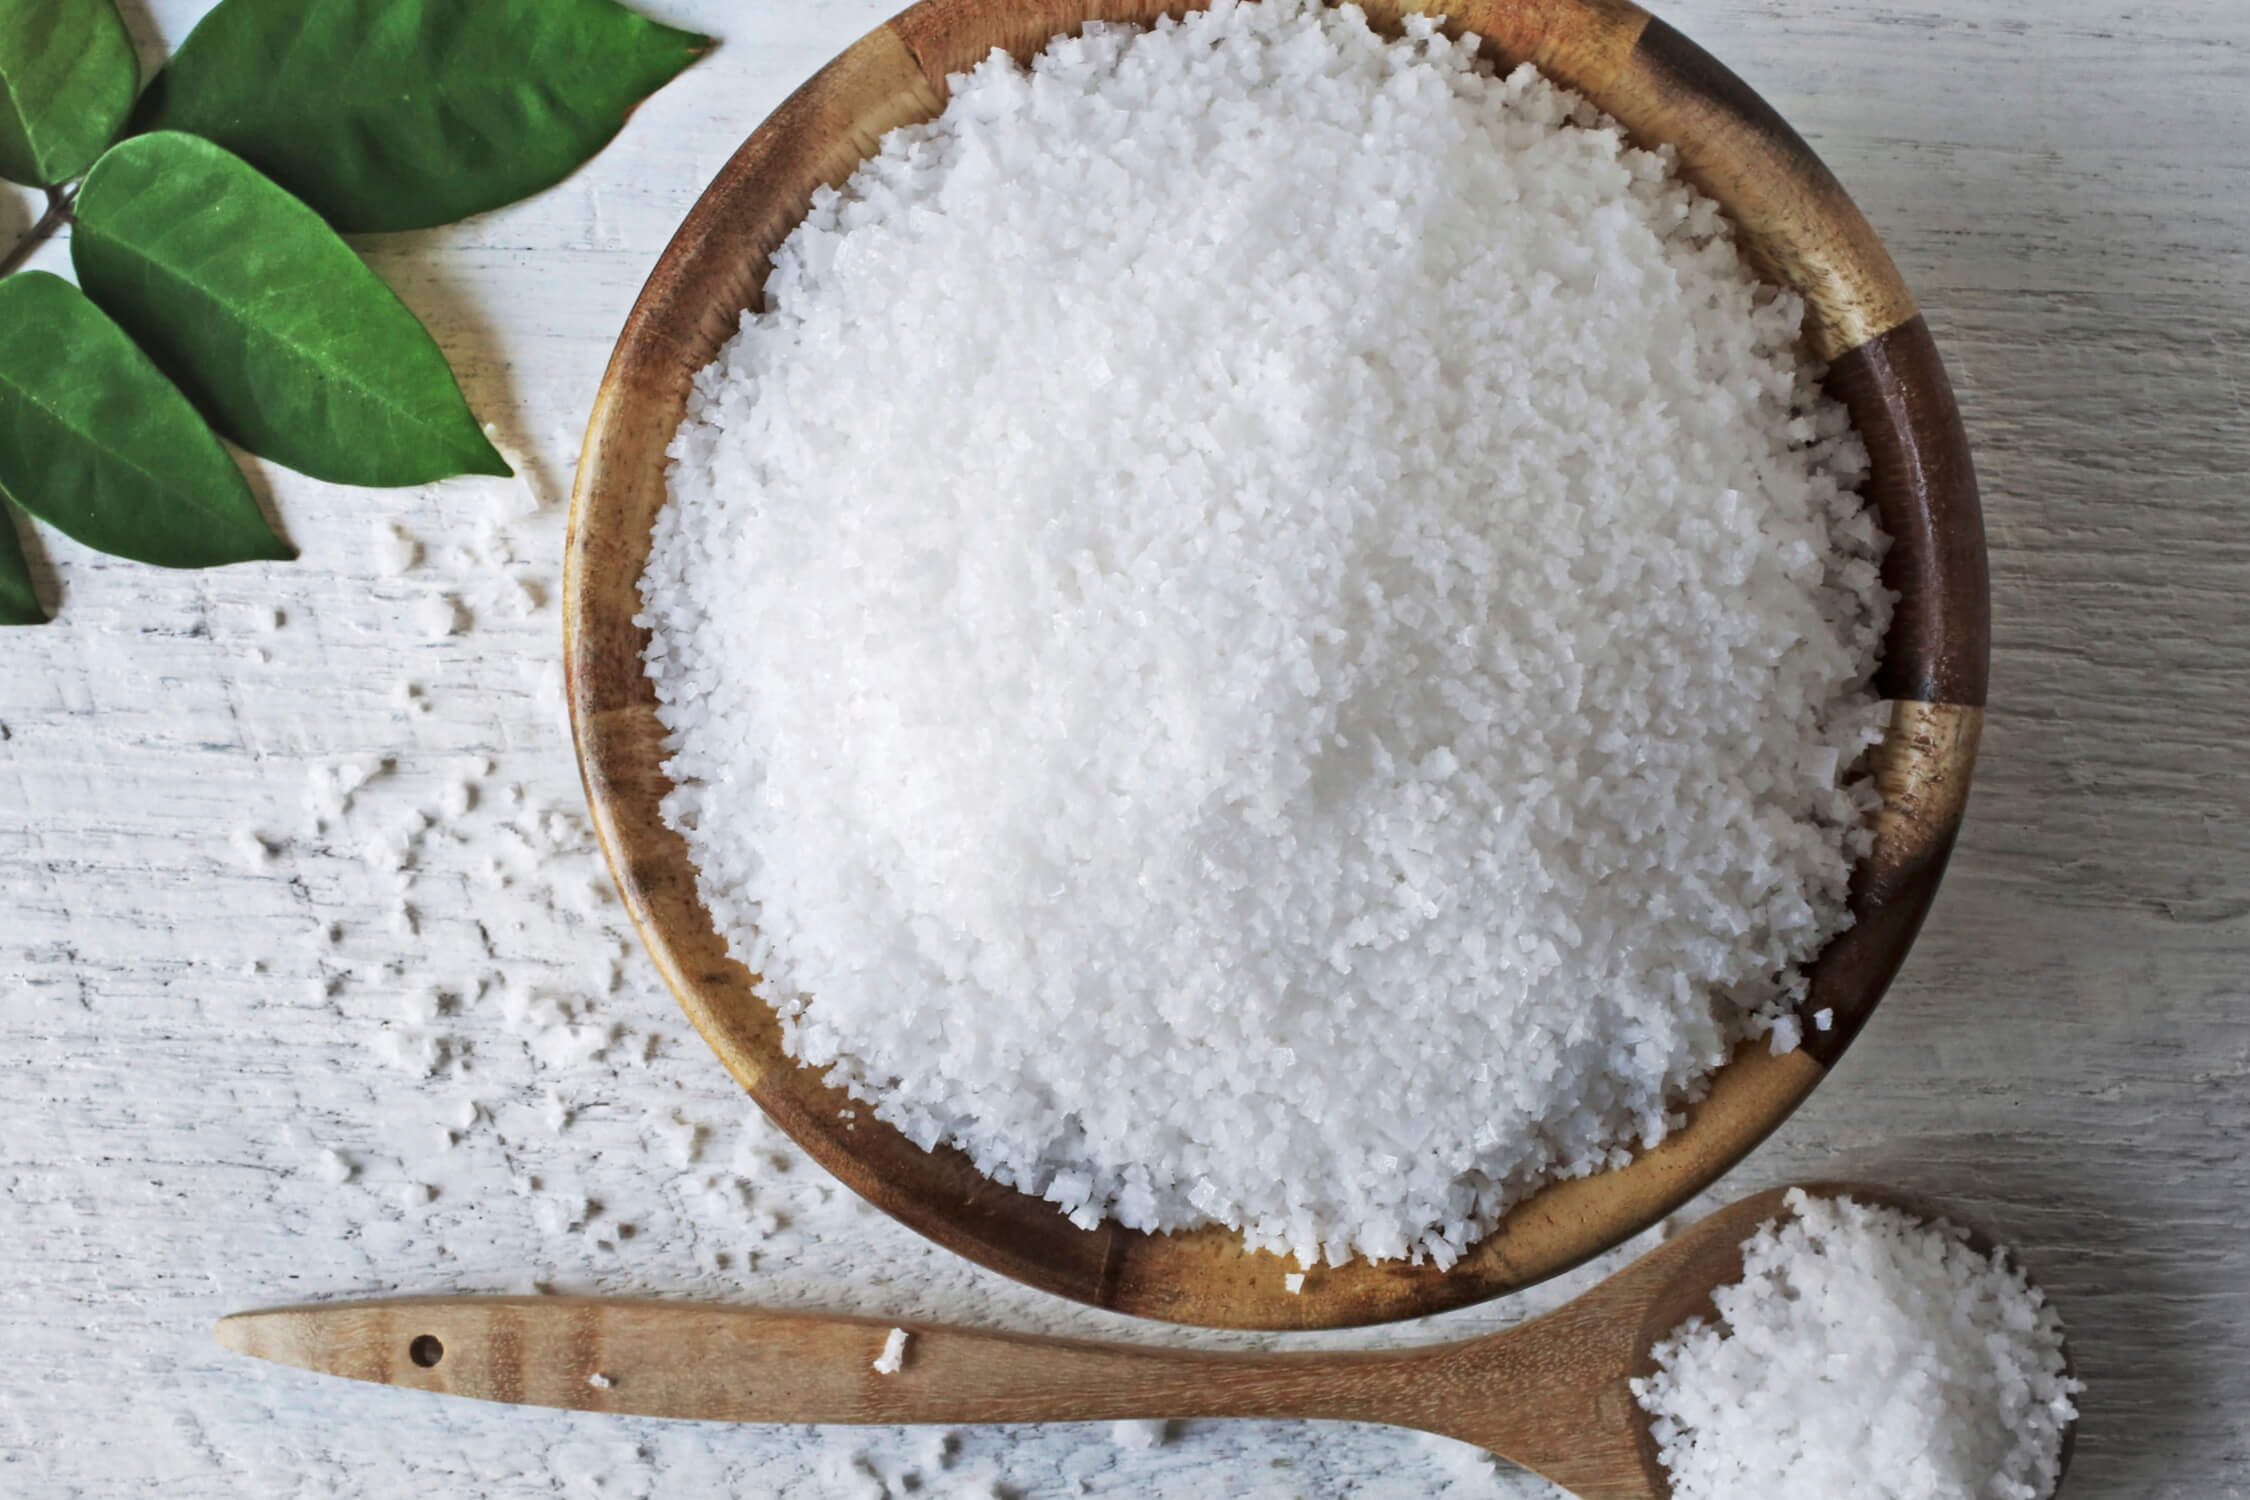 How To Use The Virtues Of Epsom Salt For Its Beauty? Tips & Recipes